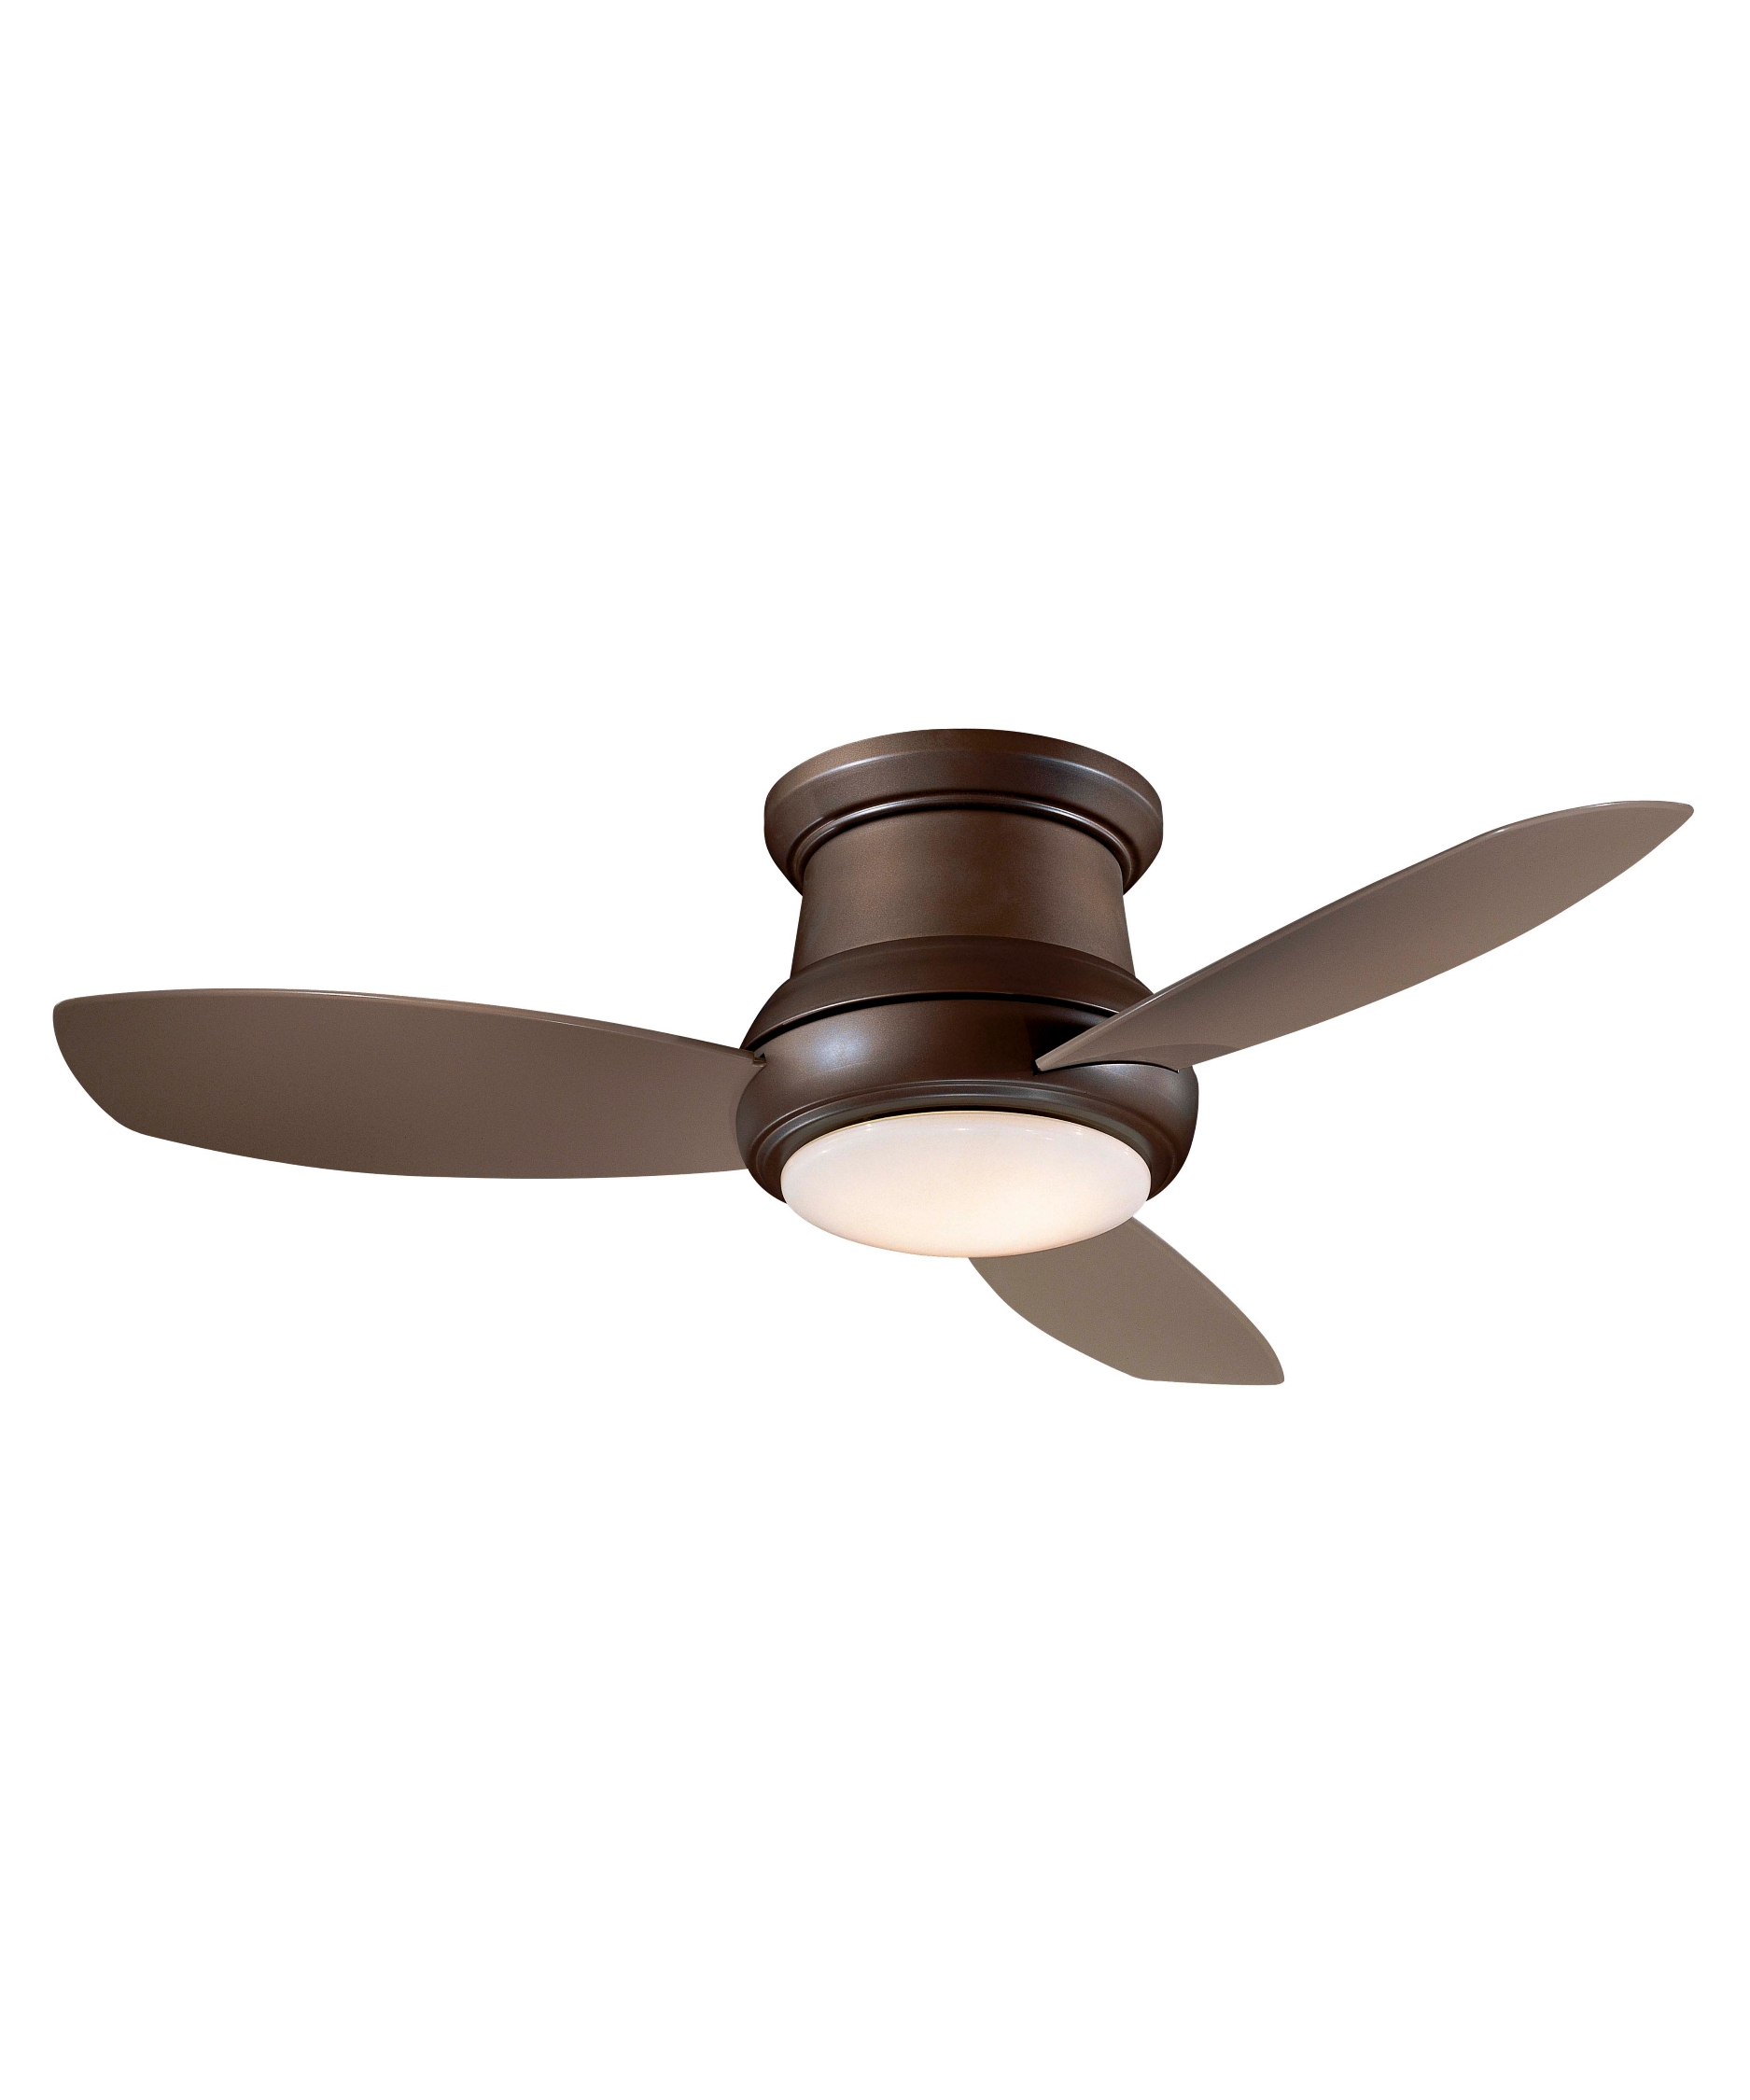 Oil Rubbed Bronze Ceiling Fan With Light Flush Mount